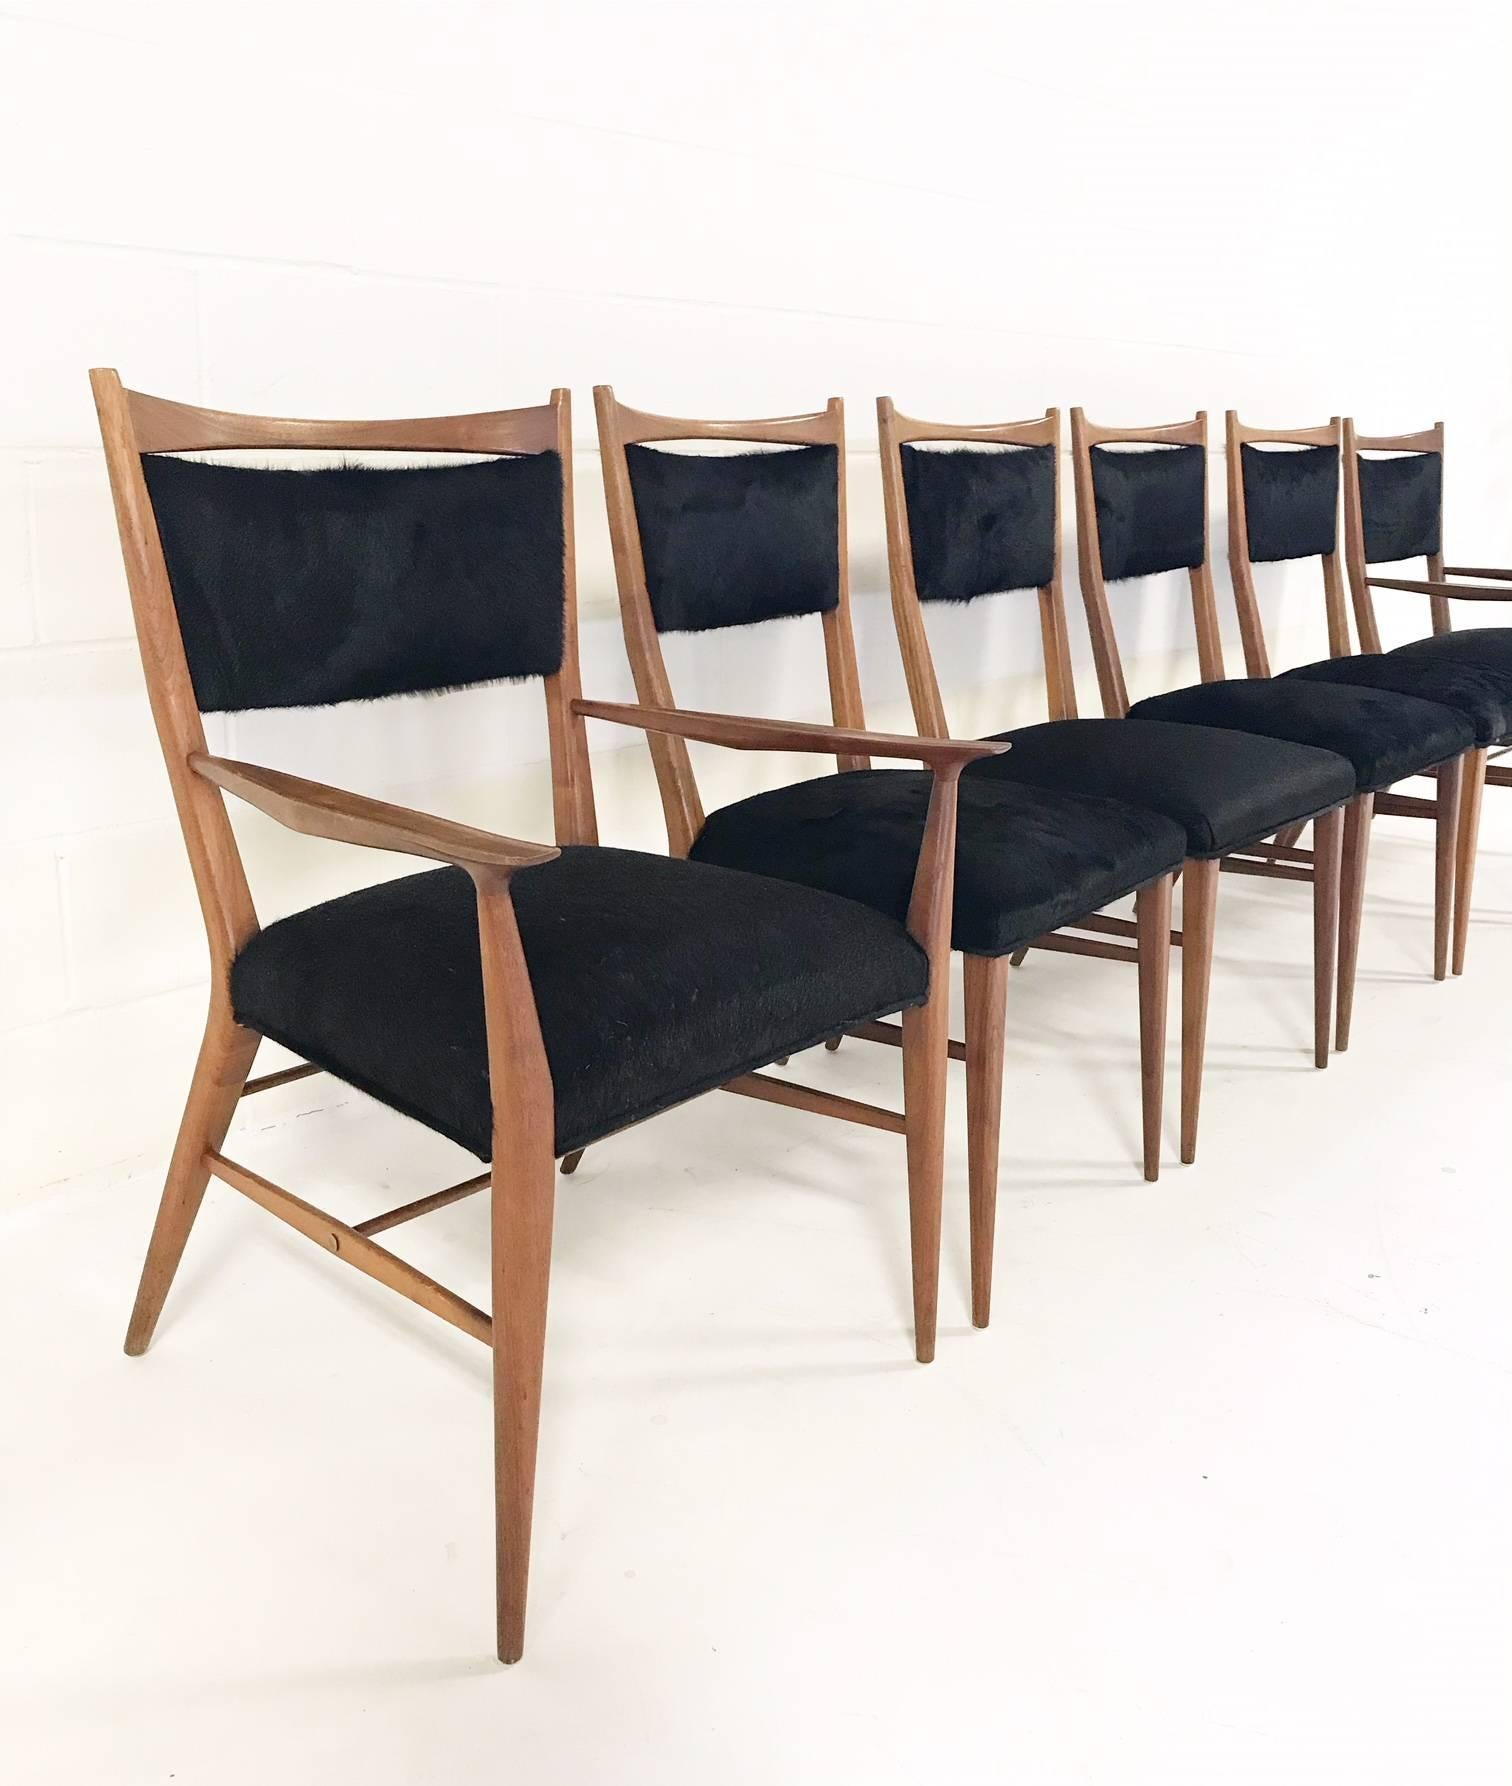 This exceptional set of walnut dining chairs was designed by Paul McCobb for Directional. 

Directional furniture was the high end of McCobb's various design endeavors of the 1950s. To maintain the uber sleekness of this beautiful set, our #1